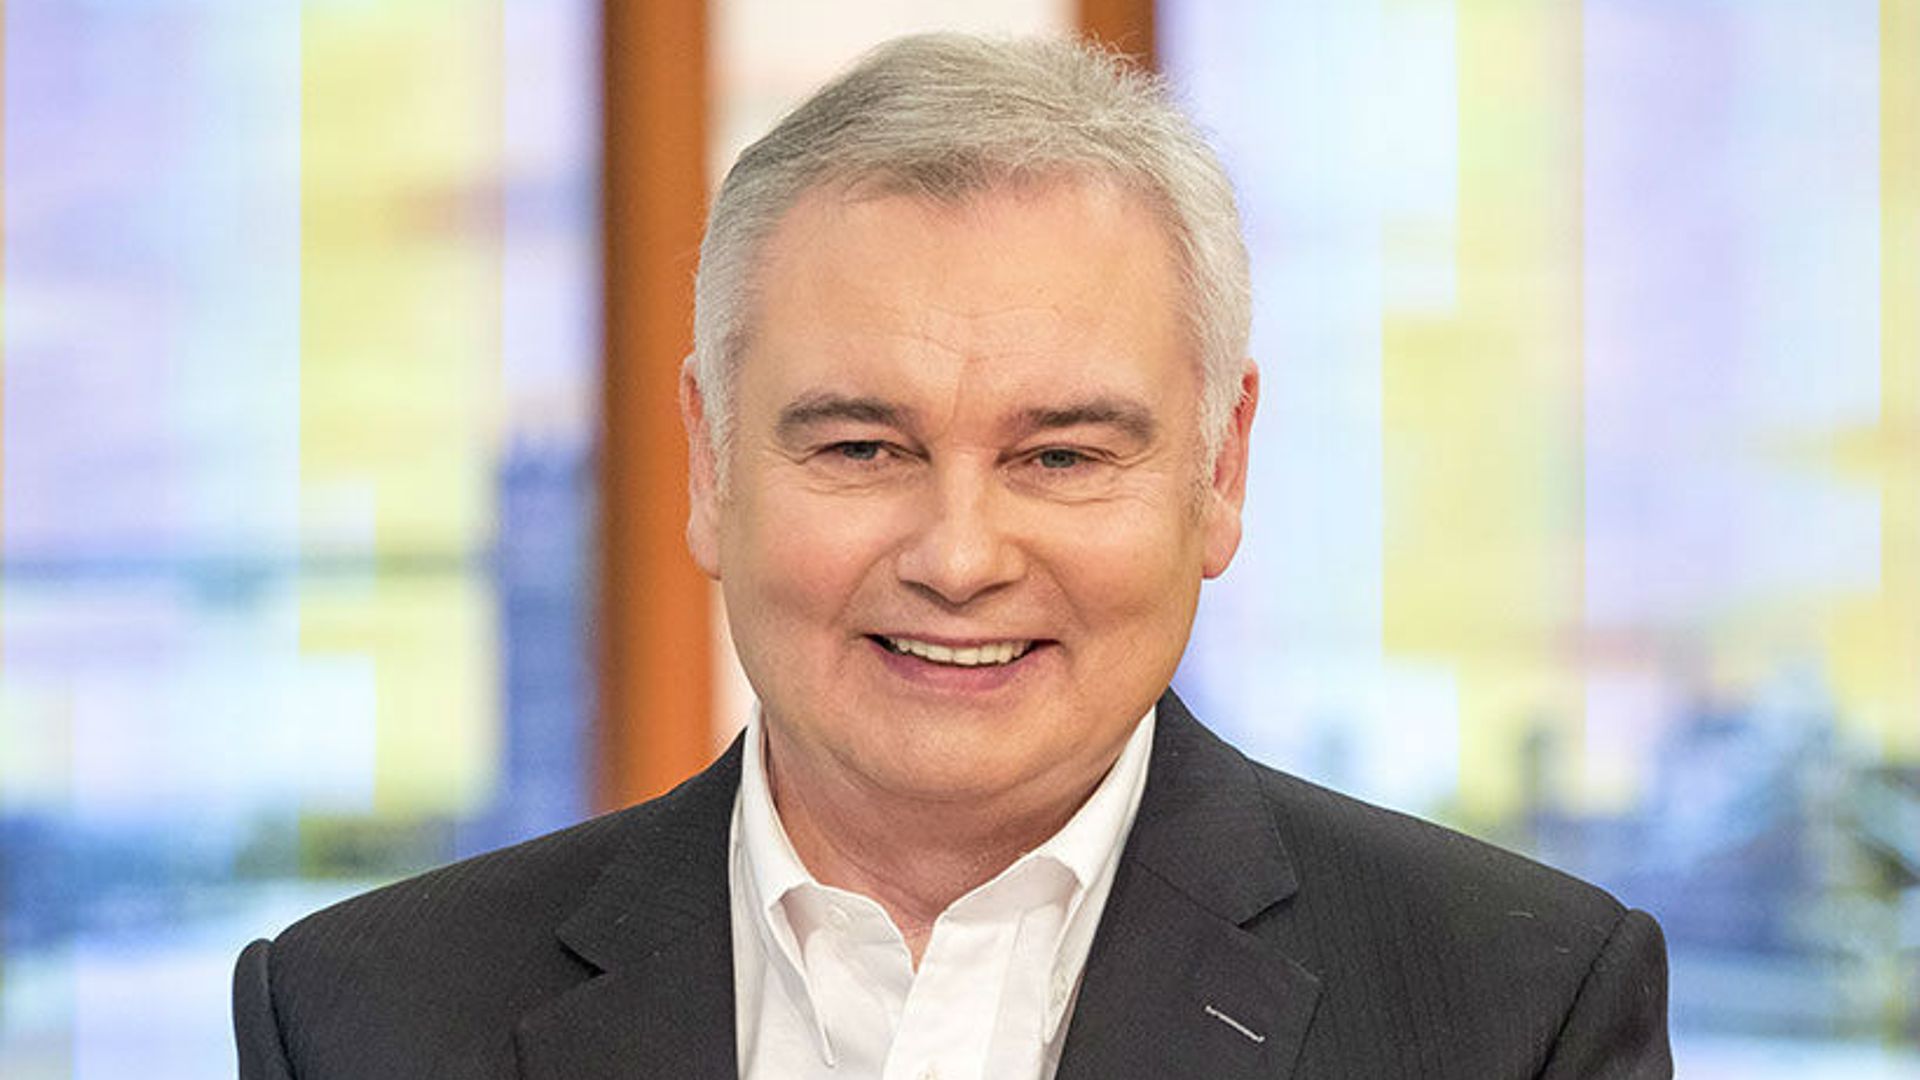 Eamonn Holmes just revealed who his work 'bestie' is – and you might be surprised